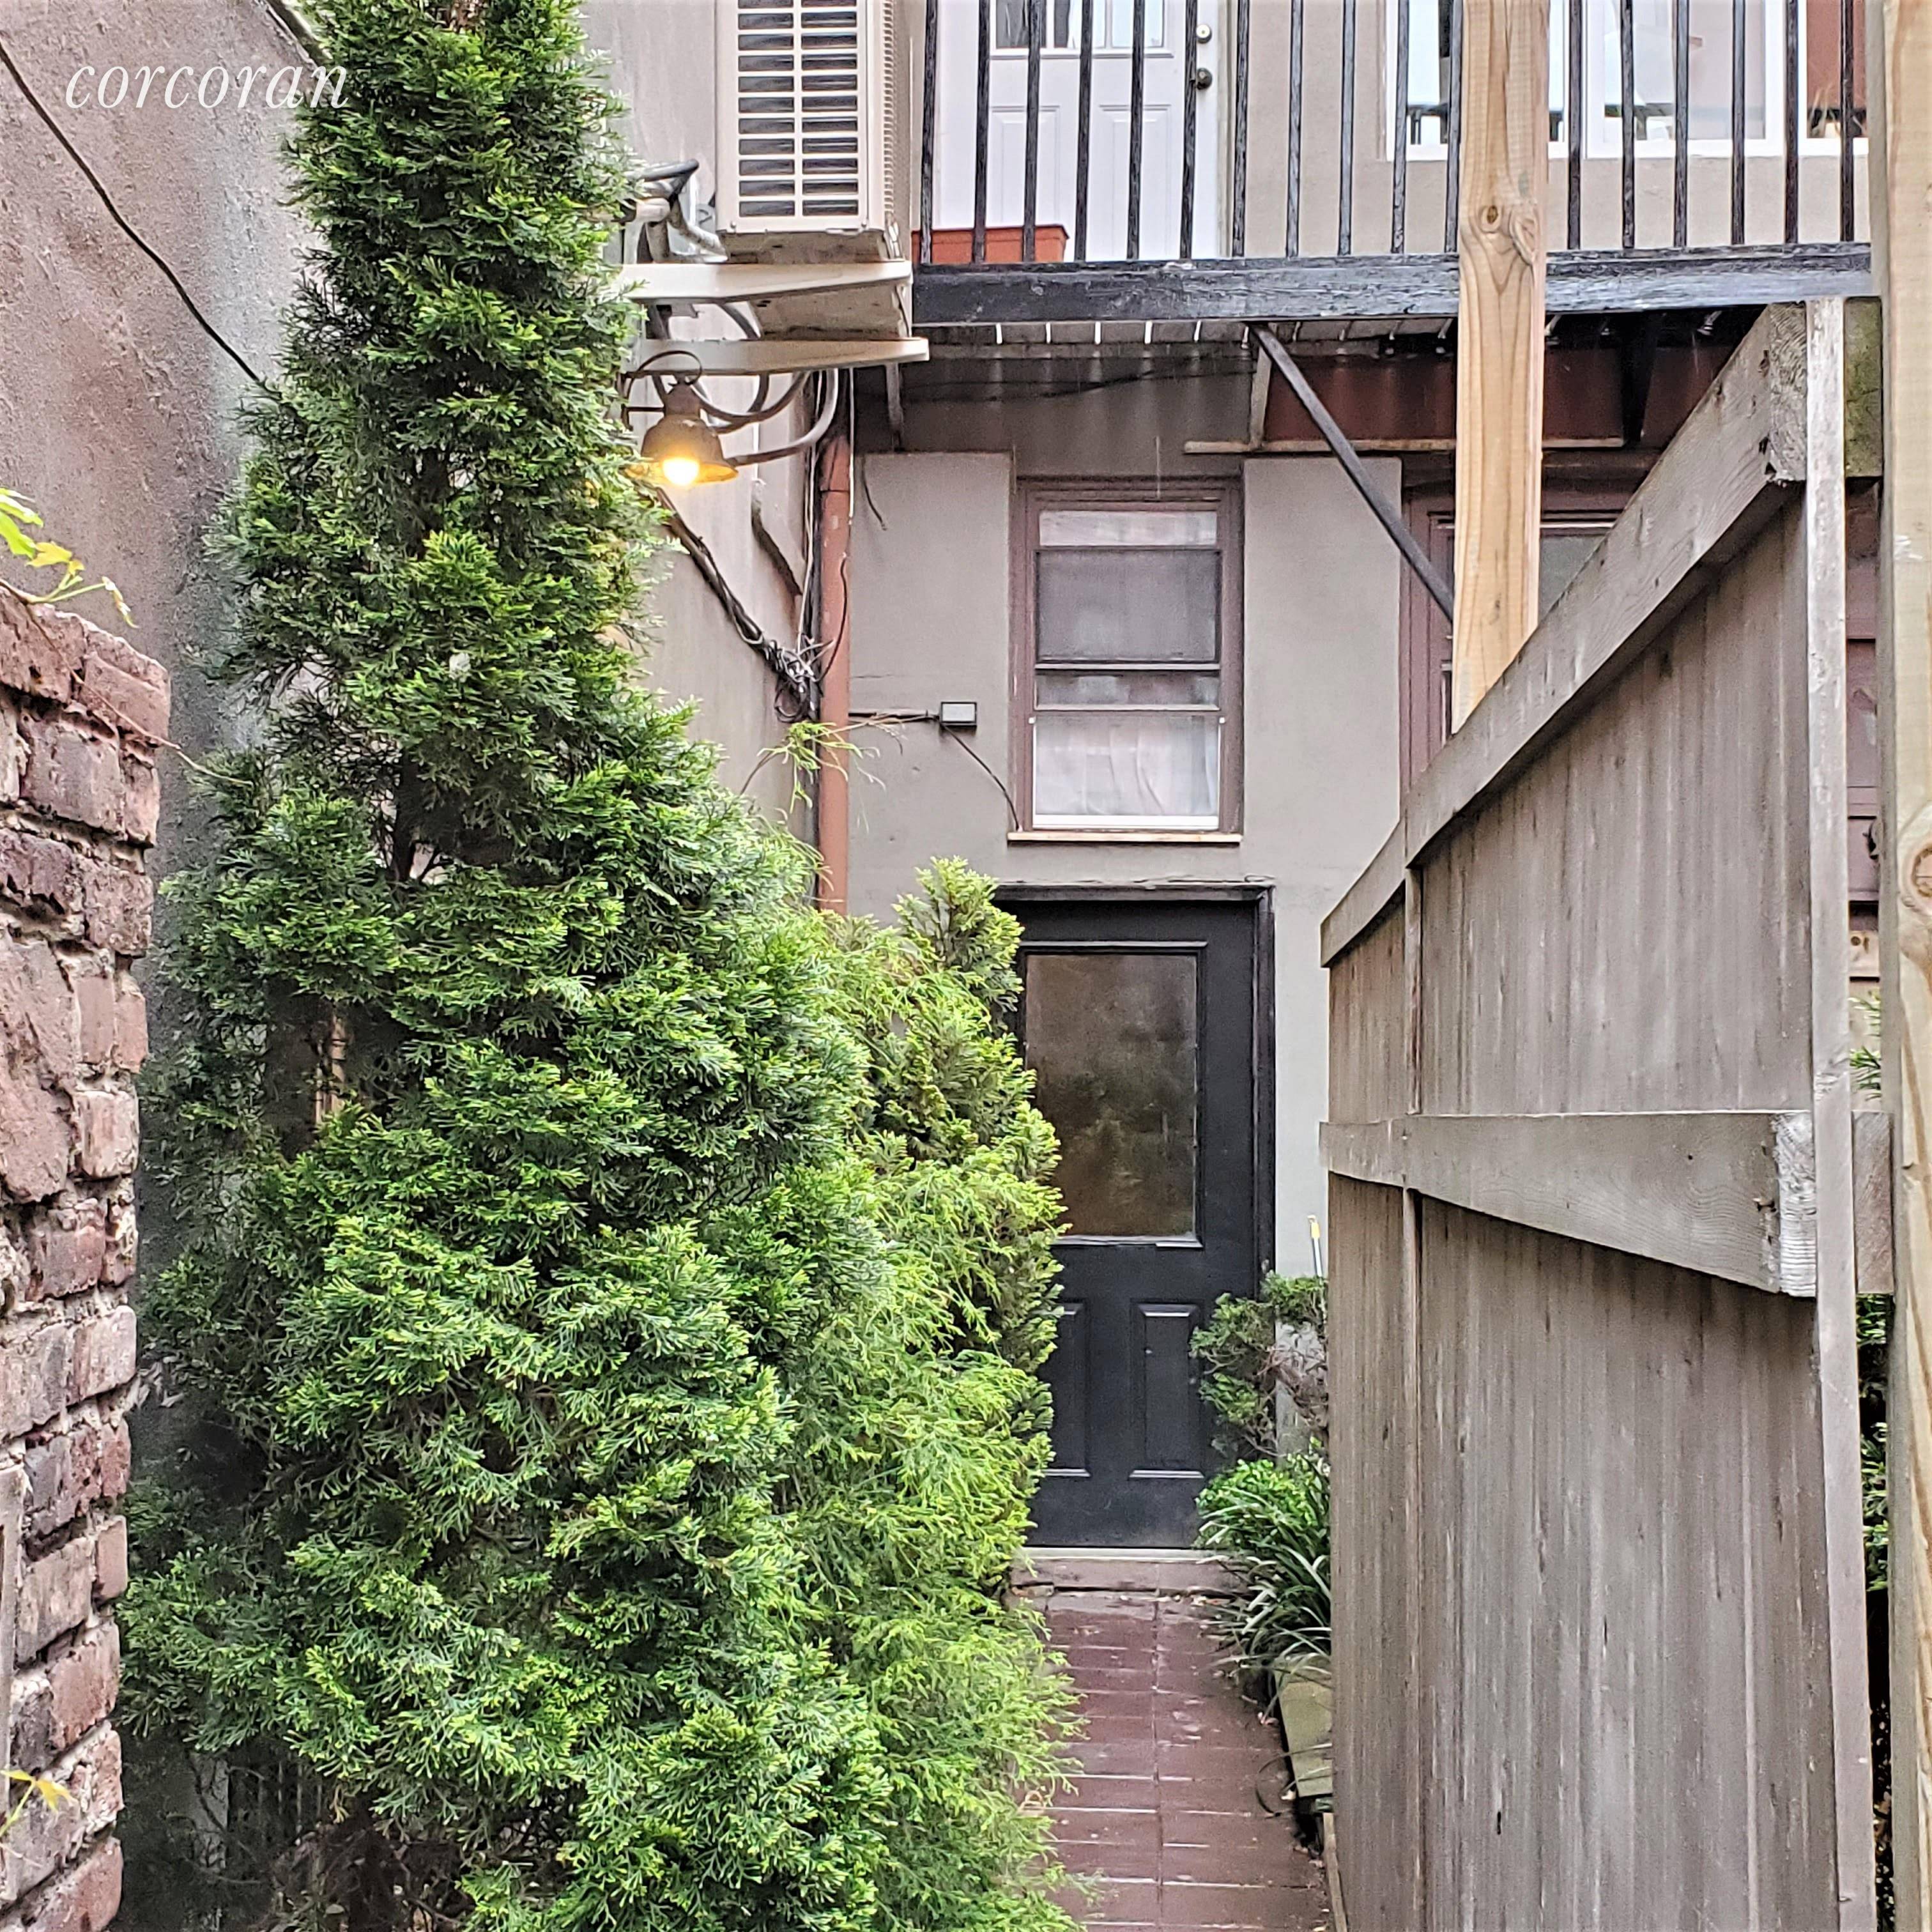 NO BROKER FEE ! Gorgeous 1000 SF True One BR LOFT in a carriage house building in the middle of a hidden oasis in North Greenpoint with private courtyard !